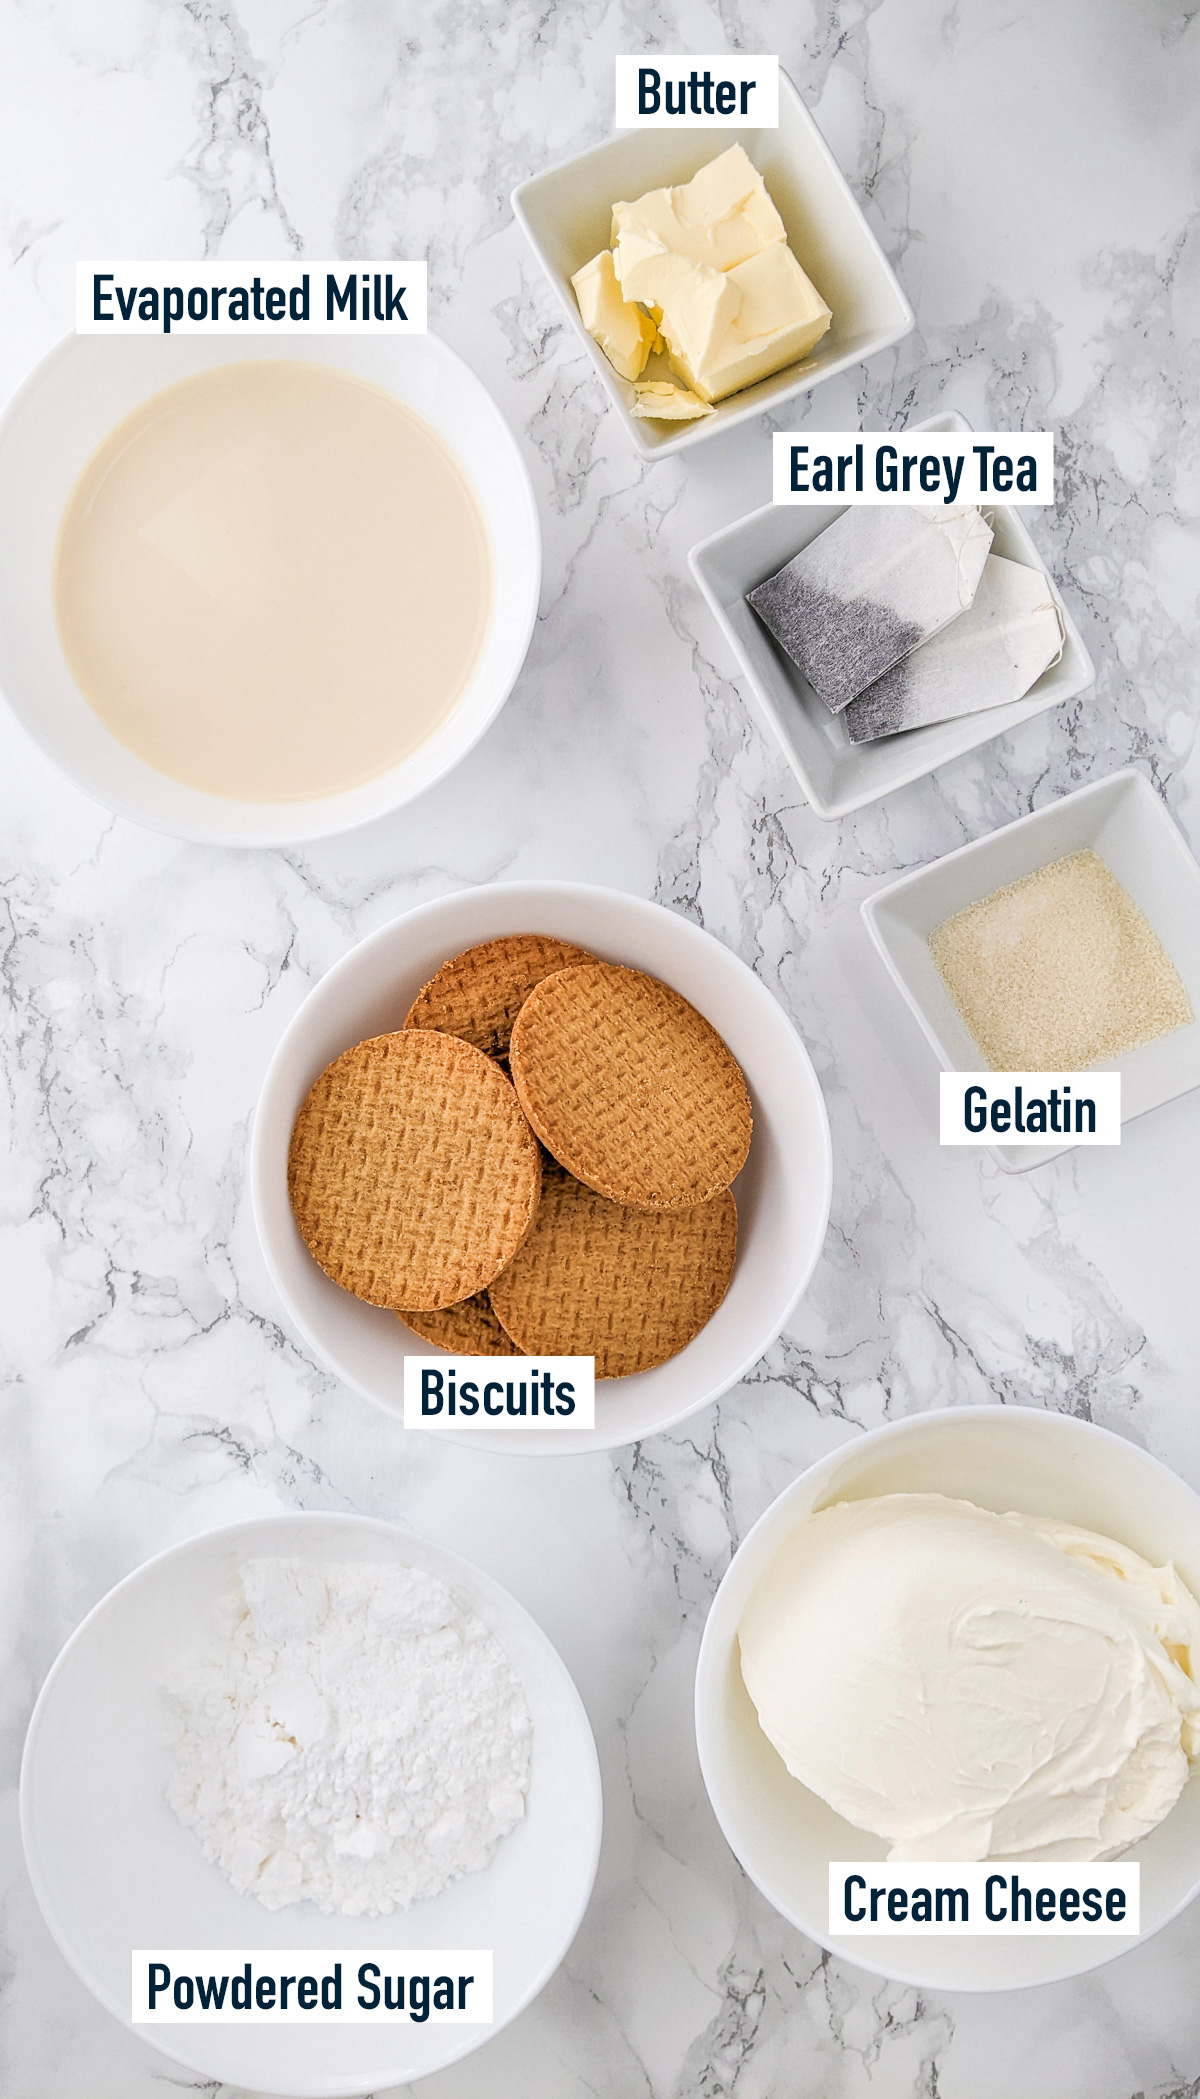 Biscuits, gelatin, cream cheese, sugar, earl gray and evaporated milk.